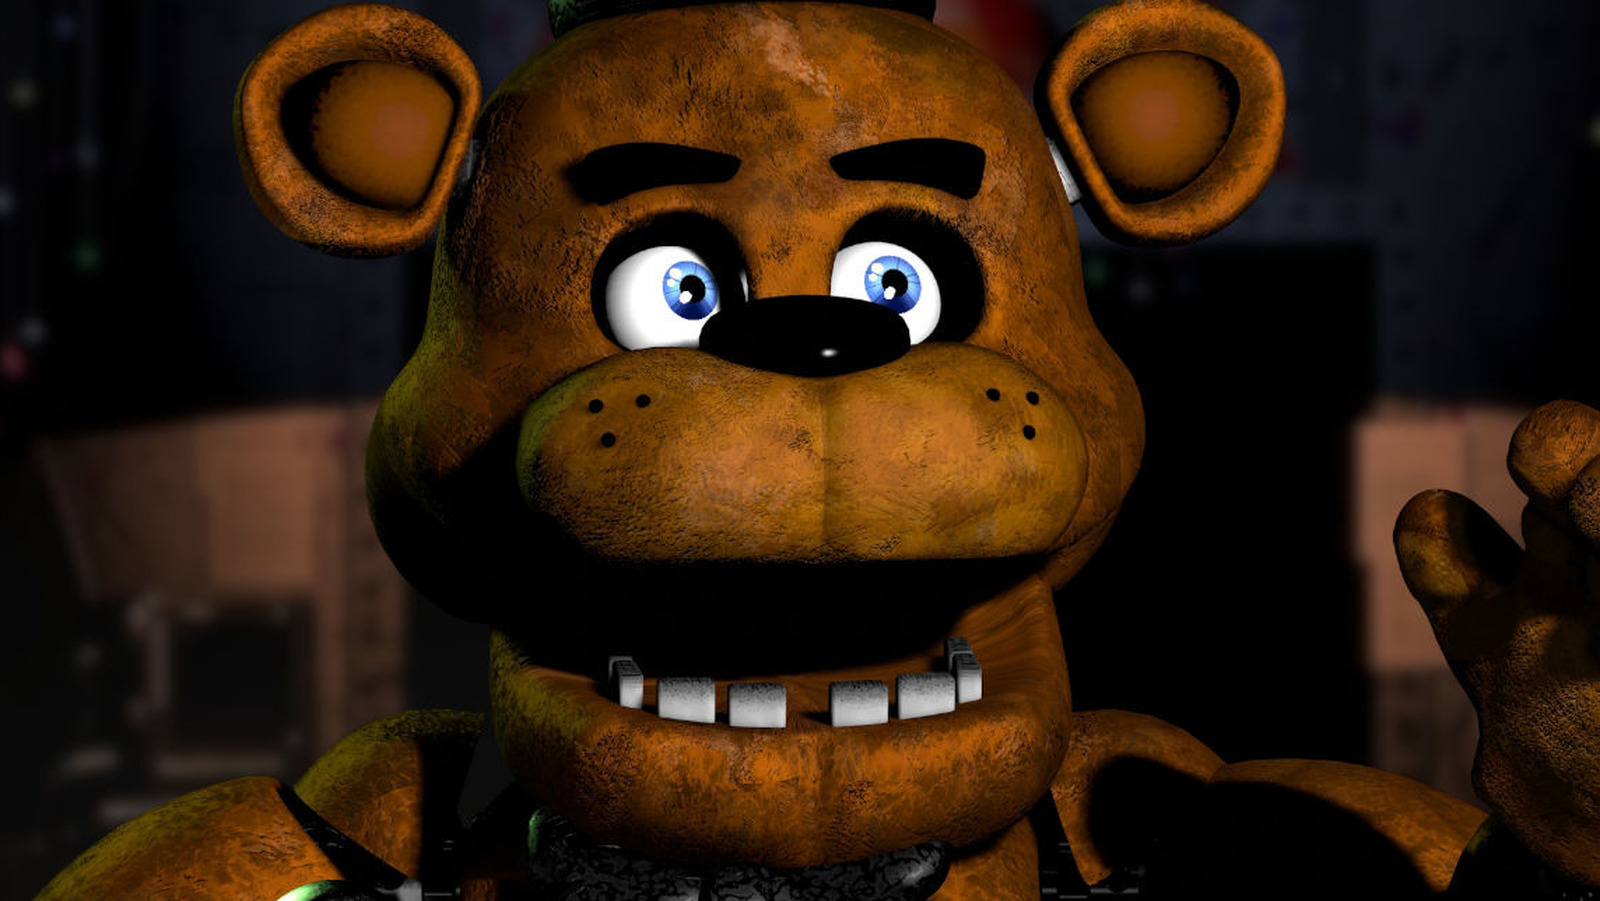 FIRST OFFICIAL LOOK AT FNAF 9  Five Nights at Freddy's Into